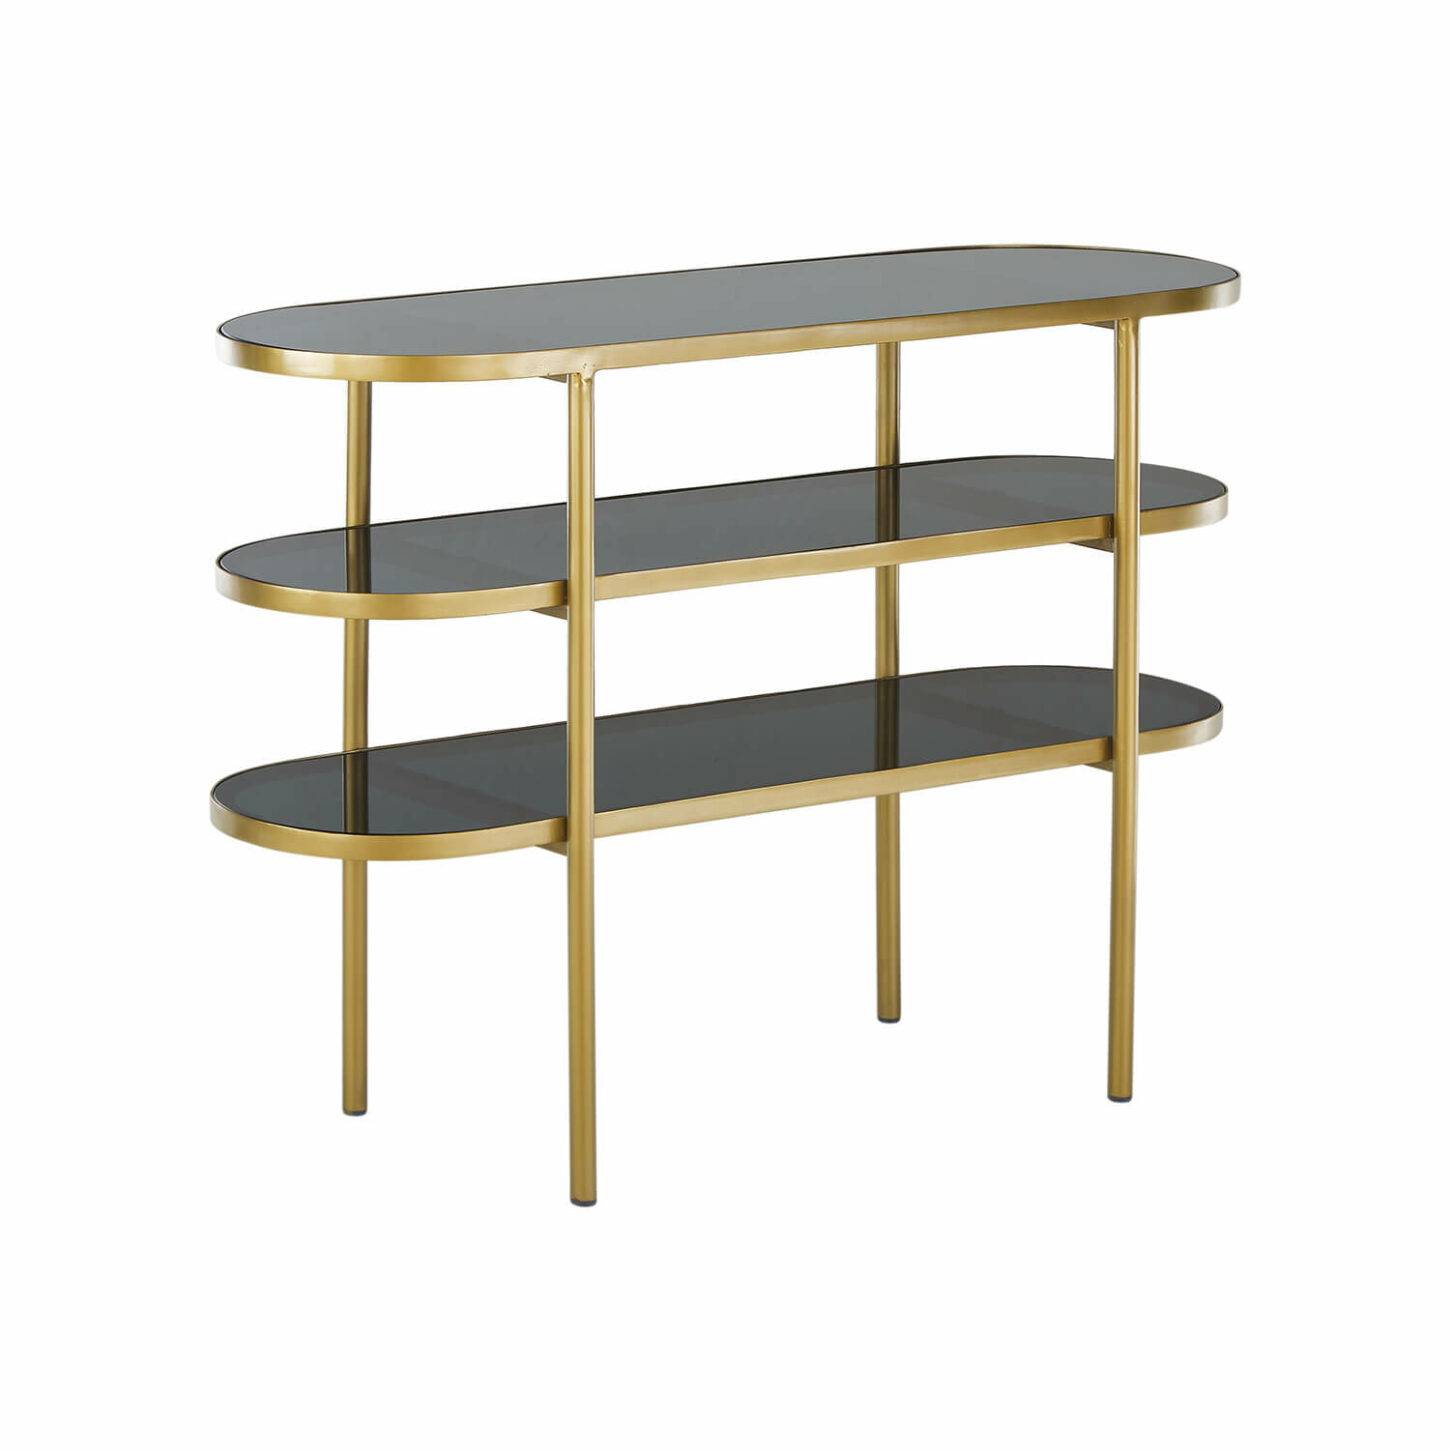 boca-curved-metal-console-with-glass-shelves-in-dubai